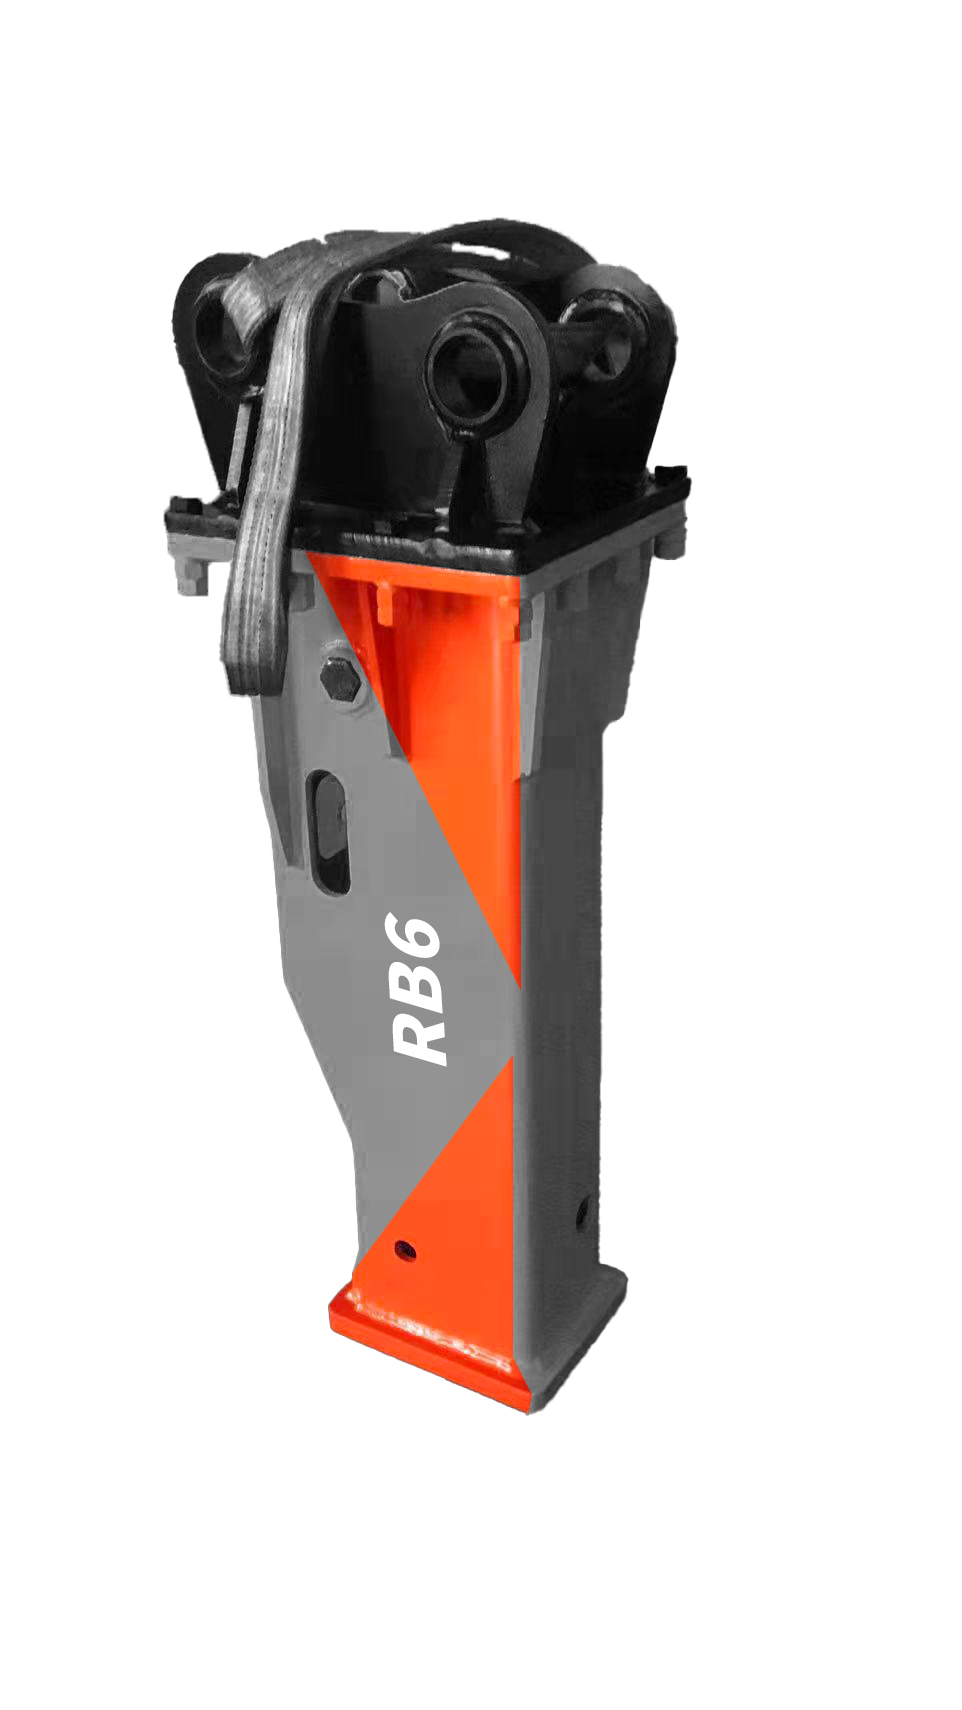 Epiroc SB Hydraulic Breakers Feature Integrated Water Port for Dust Suppression : CEG